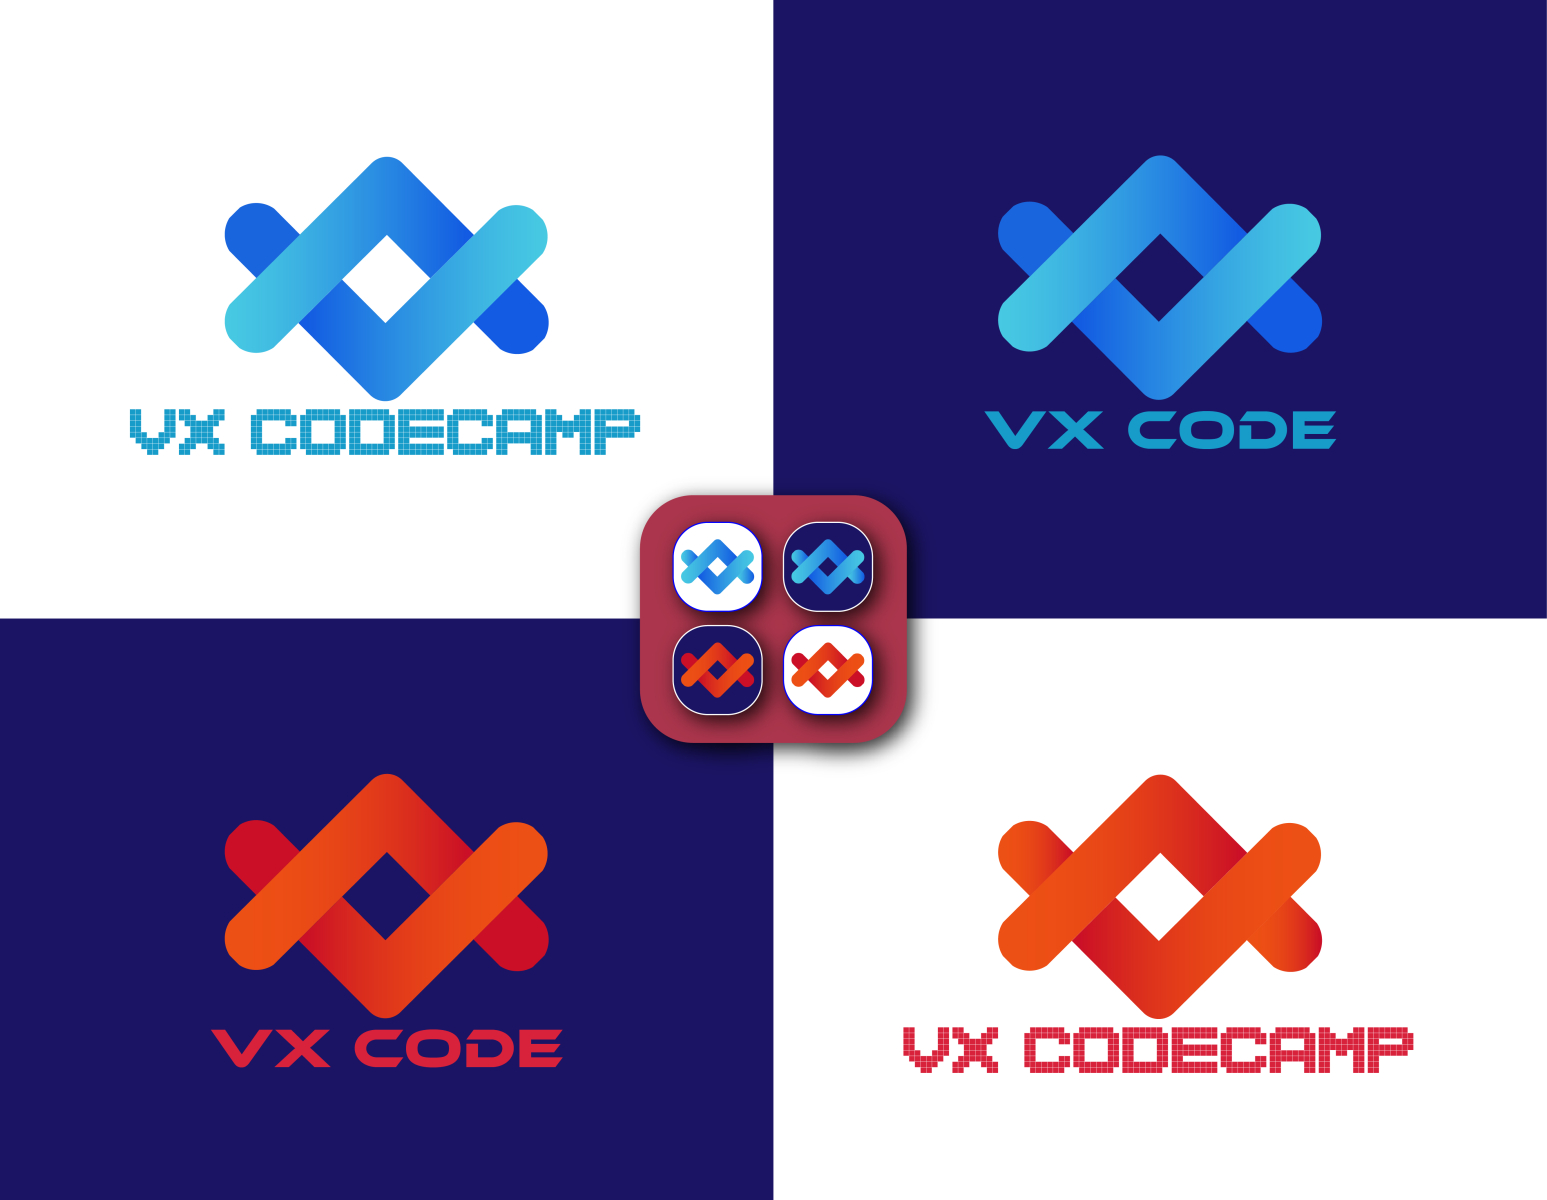 Vx Code A Logo For Code Editor Software By Md Majedul Islam On Dribbble